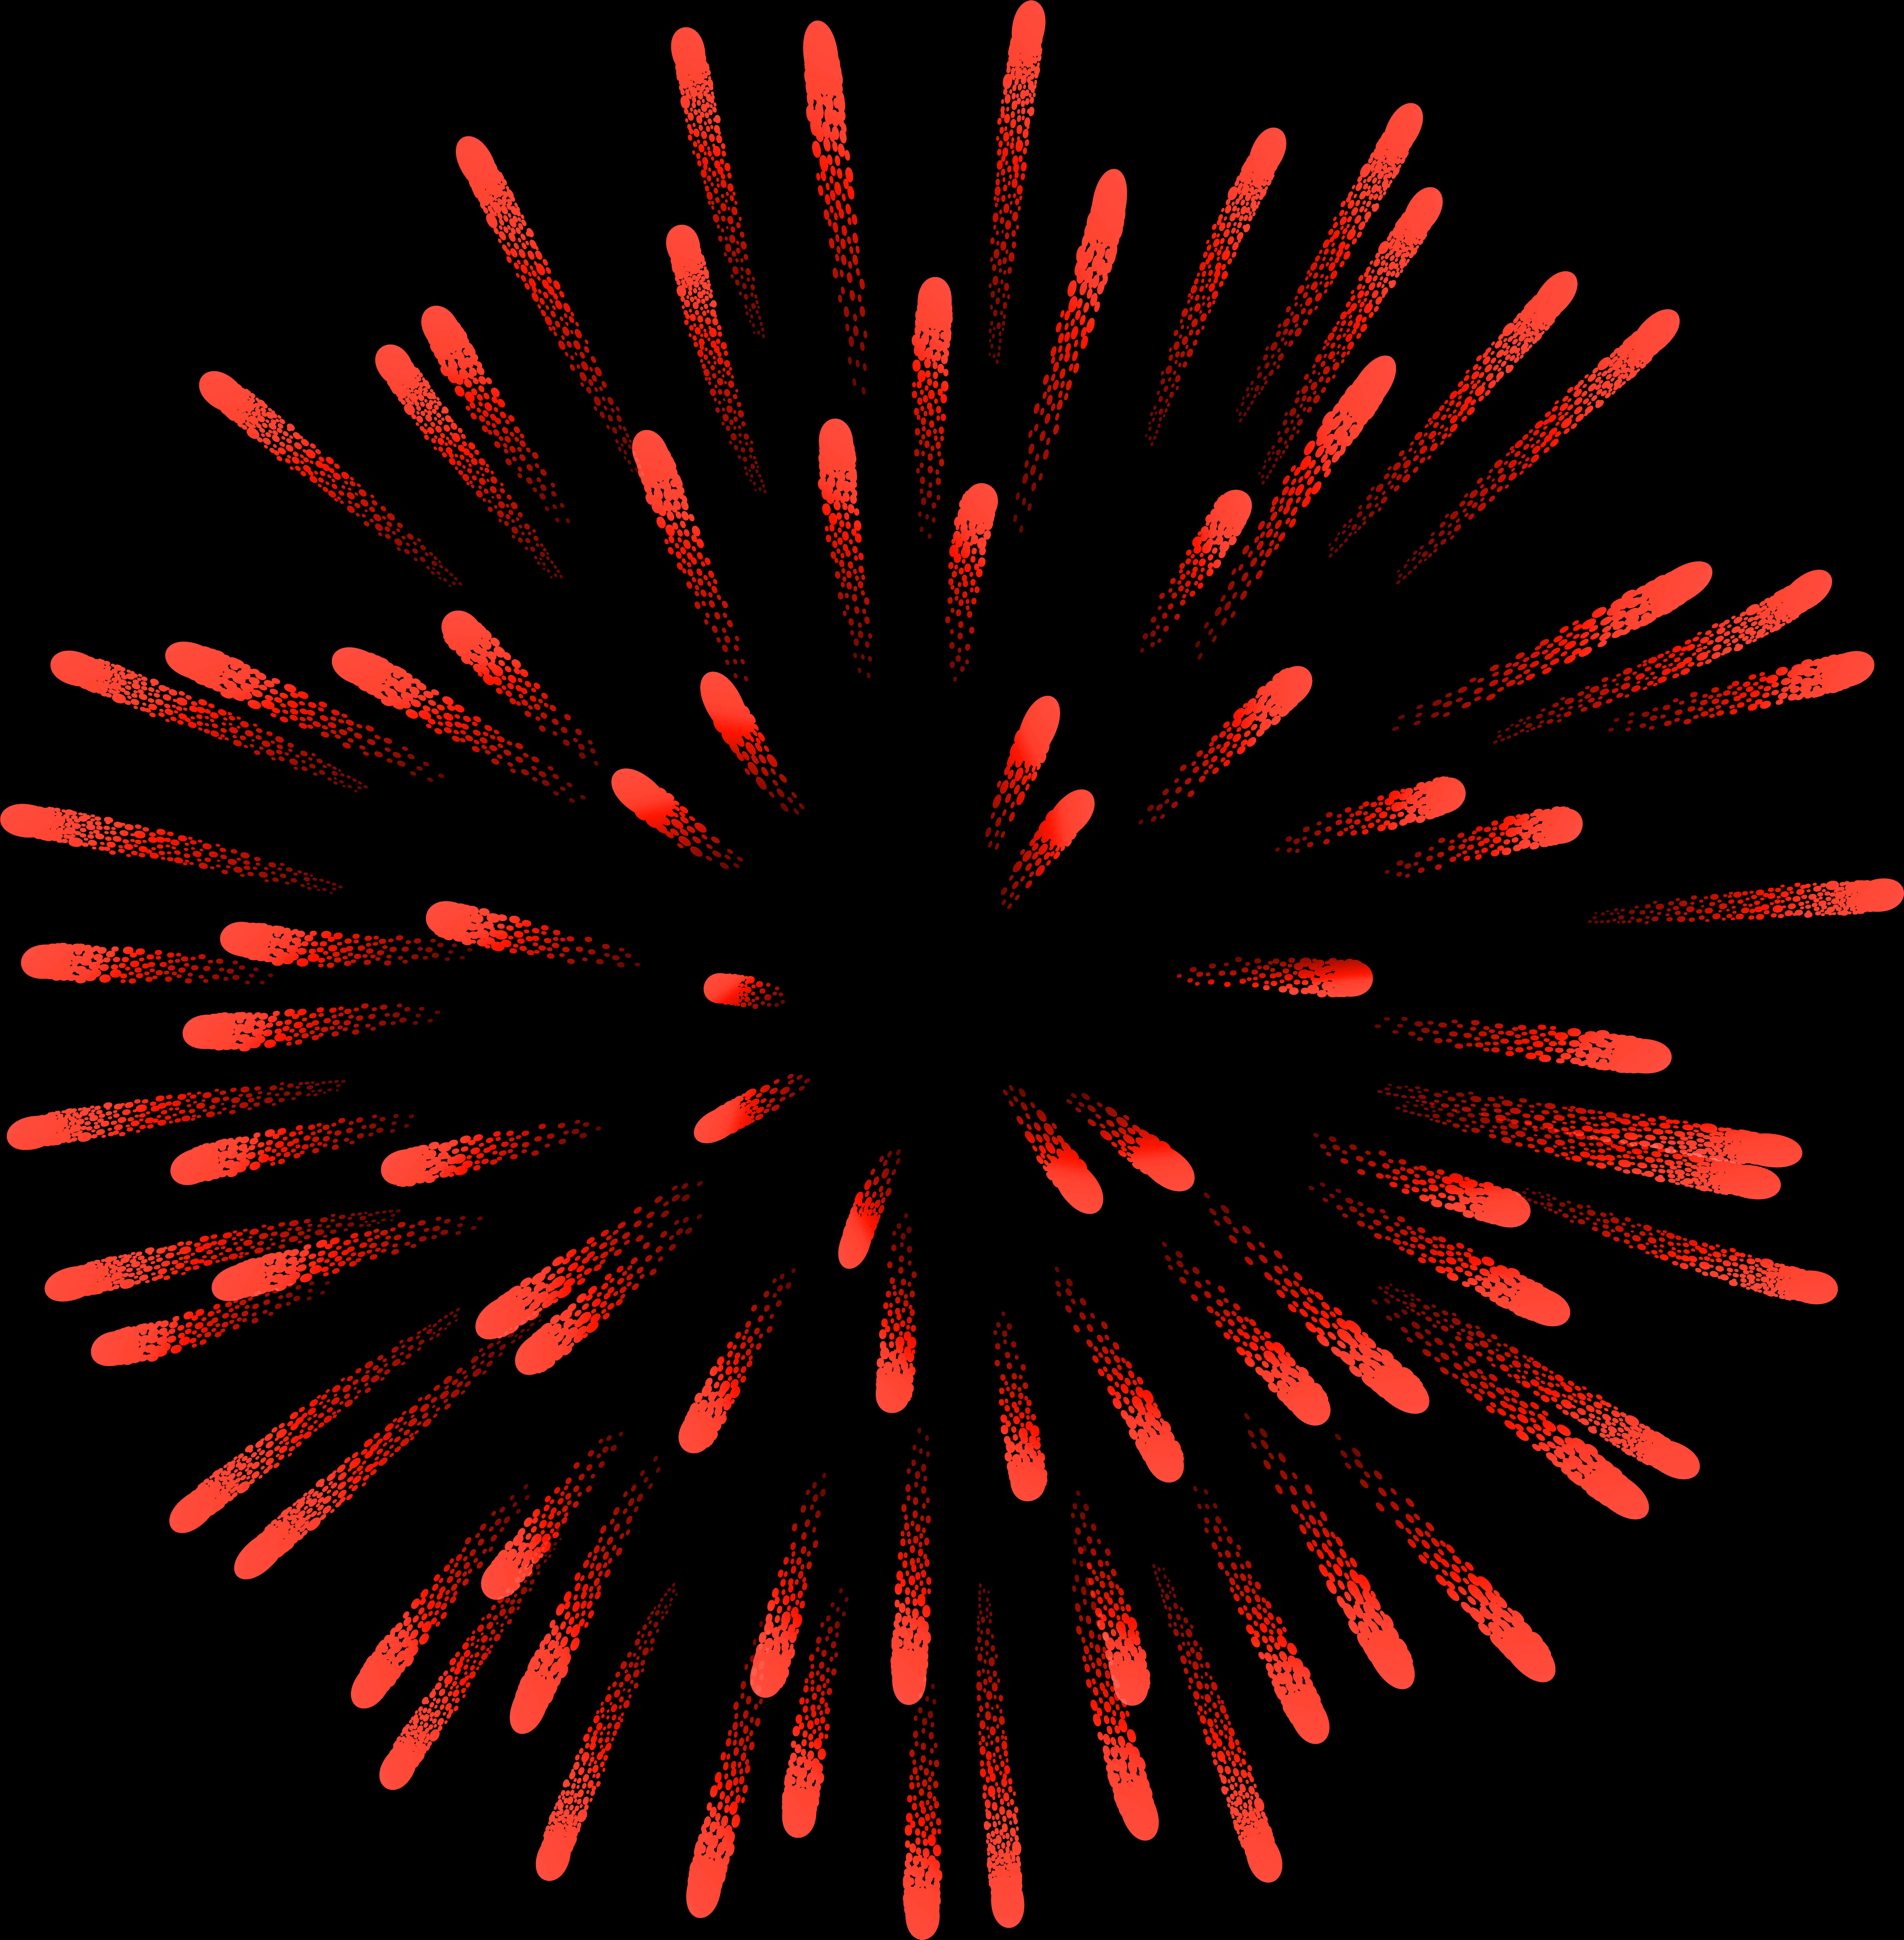 Red Firework Explosion Graphic